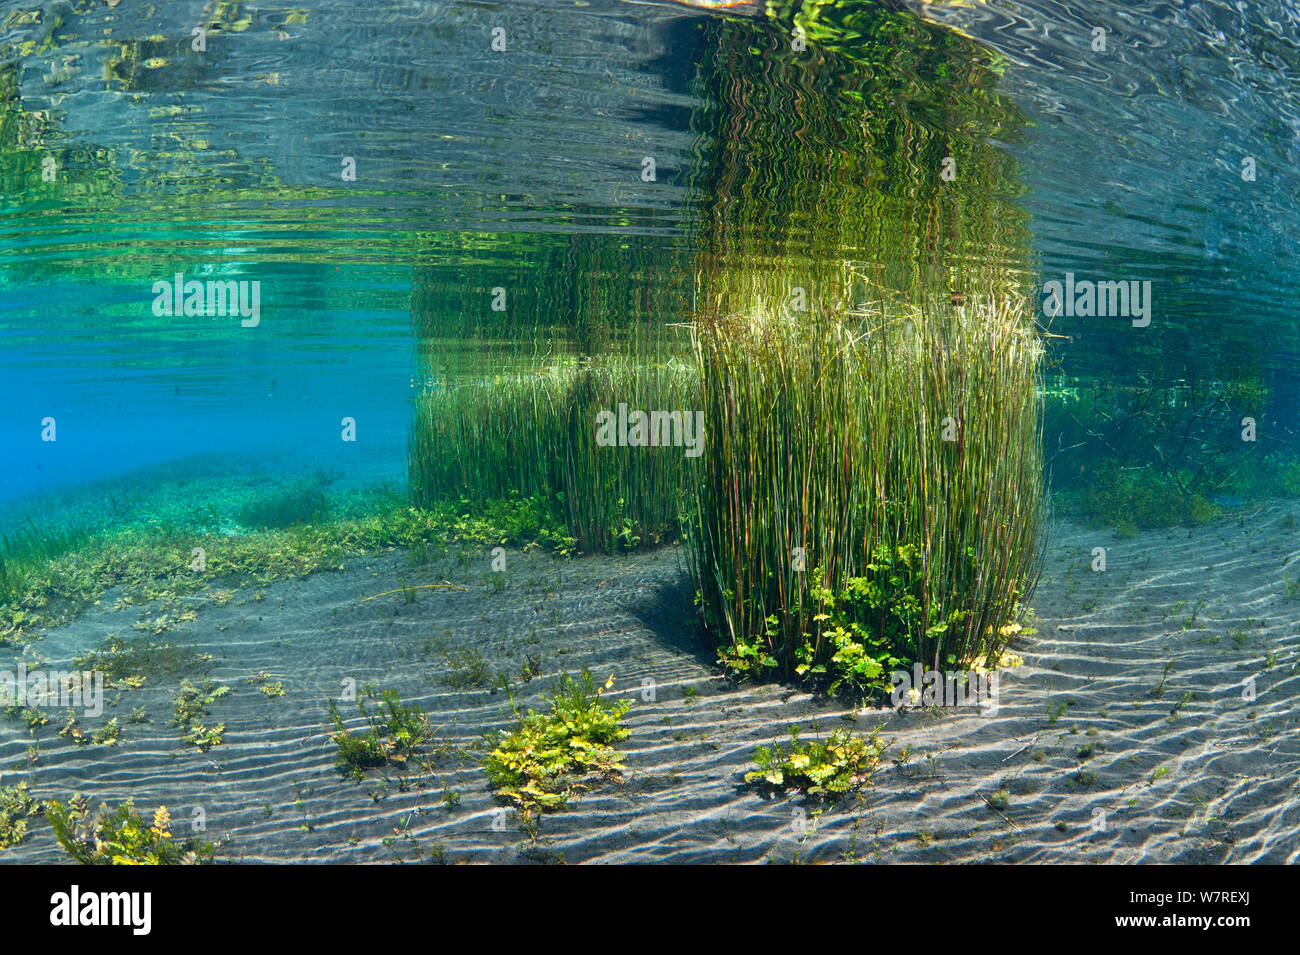 Freshwater plants, including reeds, growing in Meltwater pond. Capodacqua; Capistrano, Abruzzo, Italy. Stock Photo